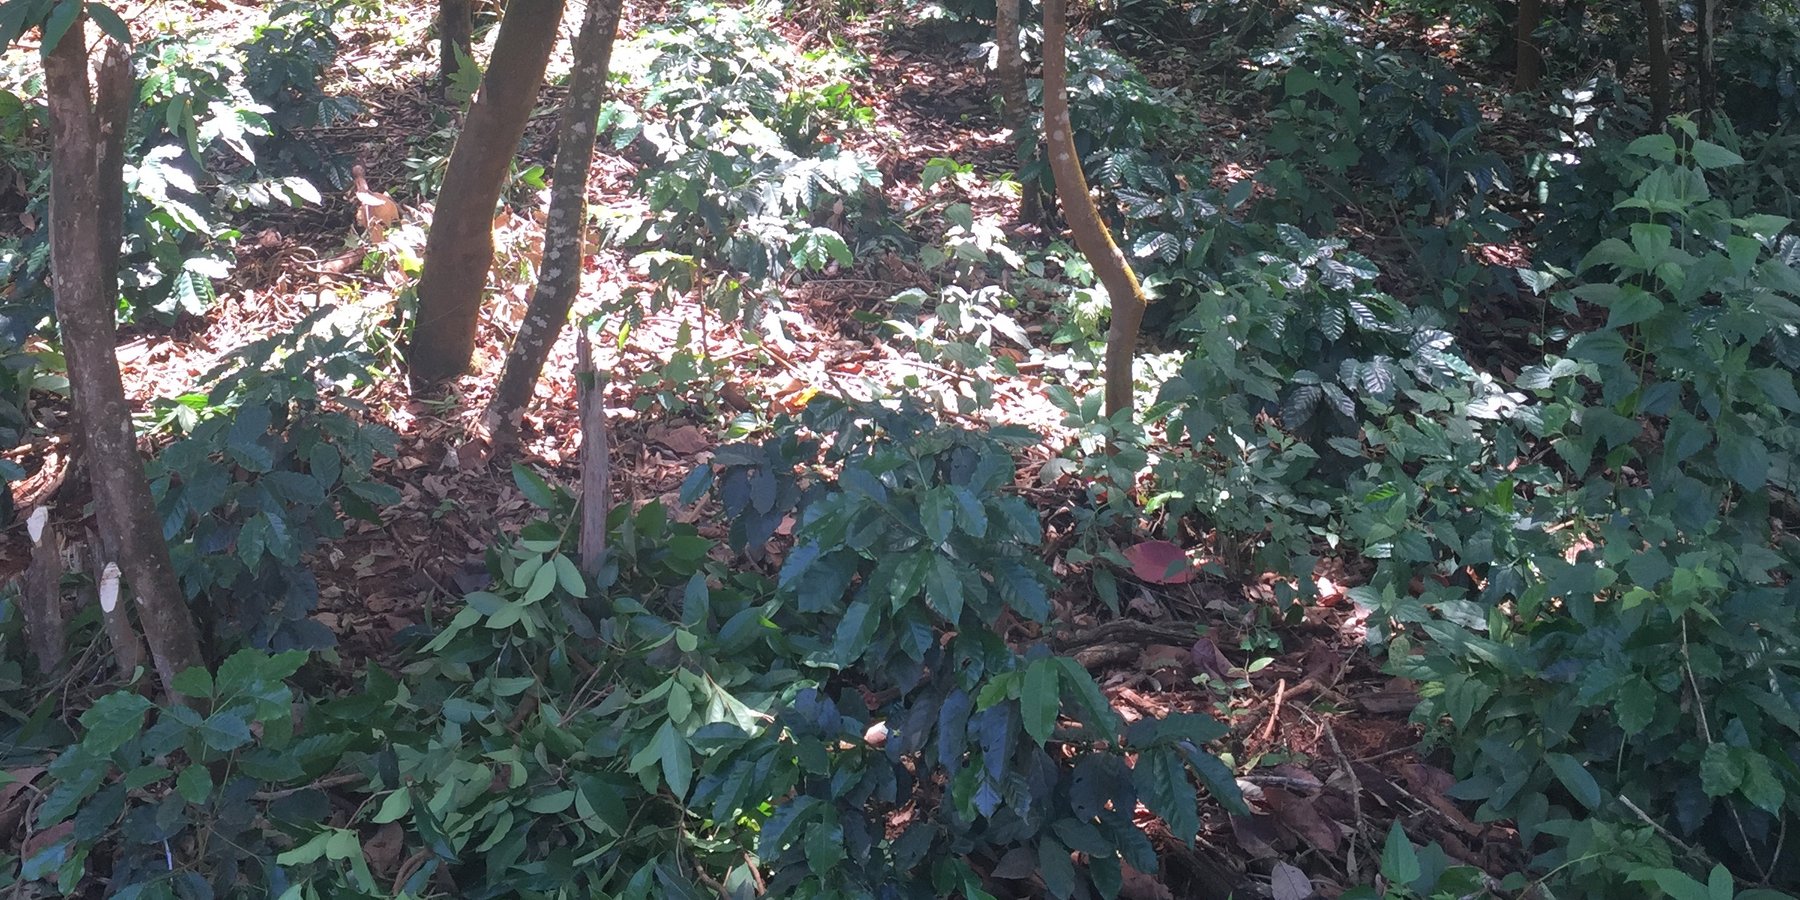 Coffee cultivation with the trees in a fallow area